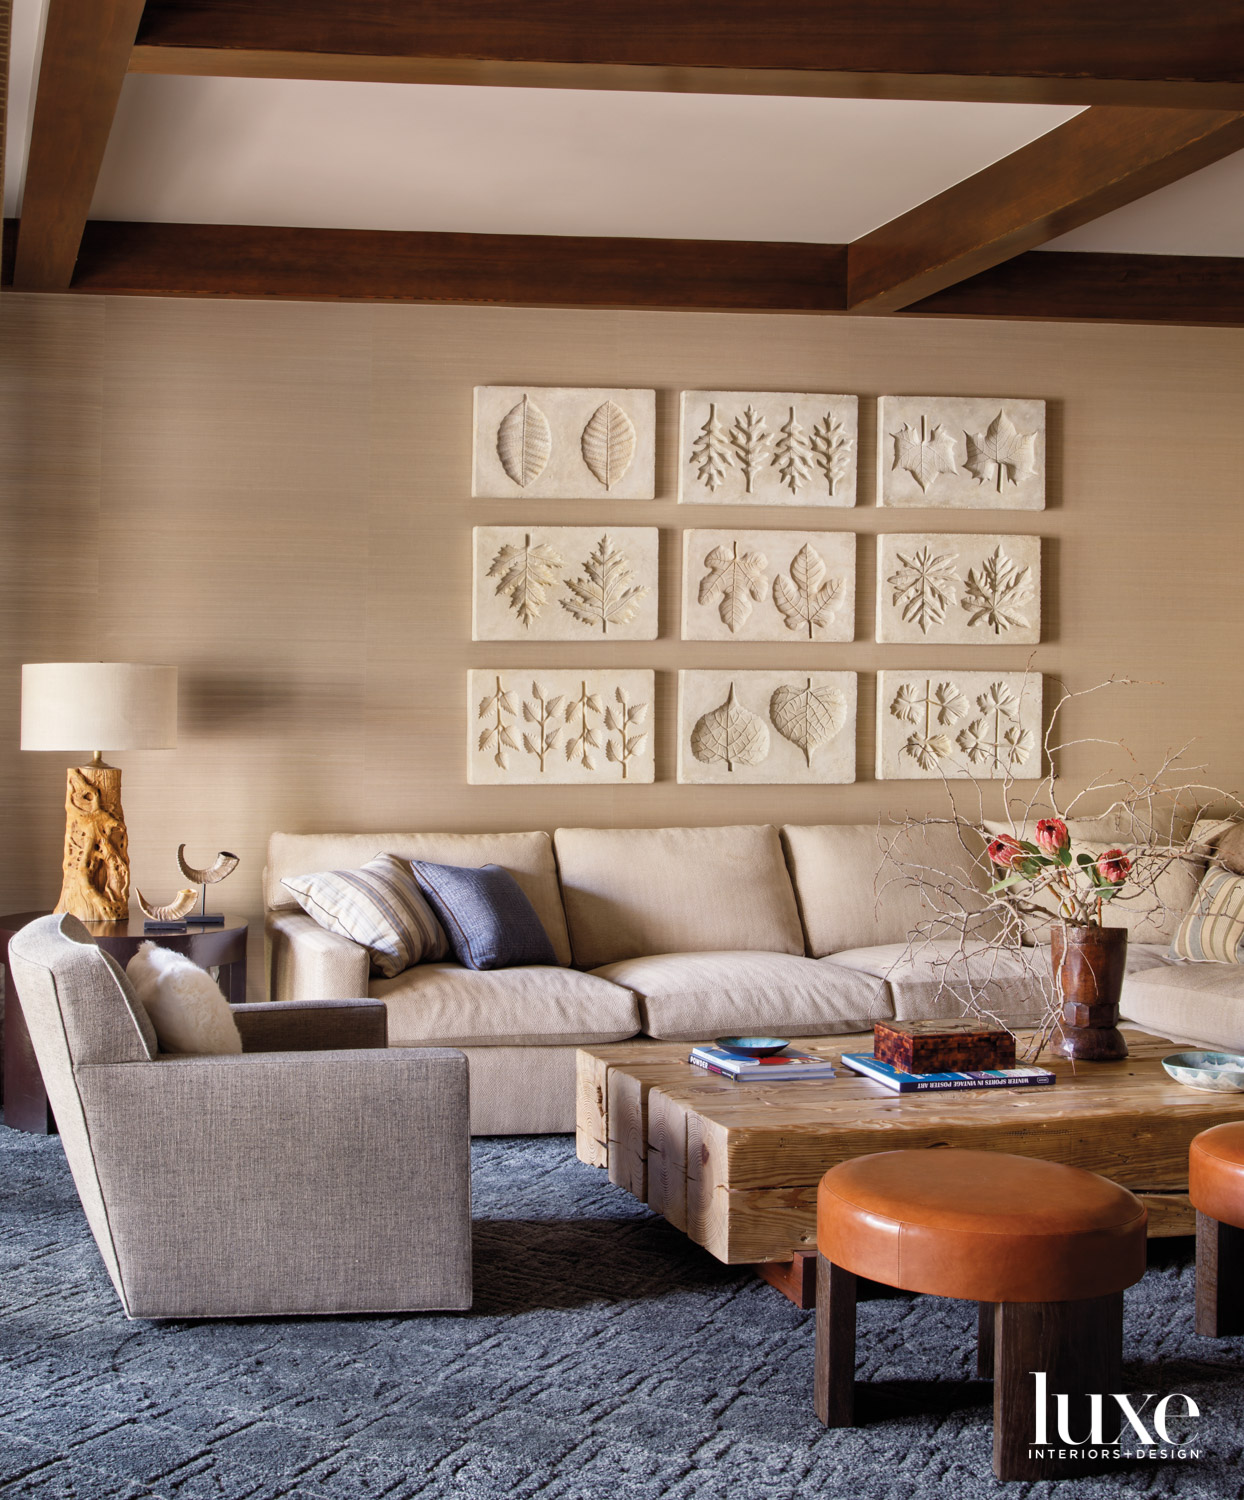 A family room has a series of leaf impressions as art.